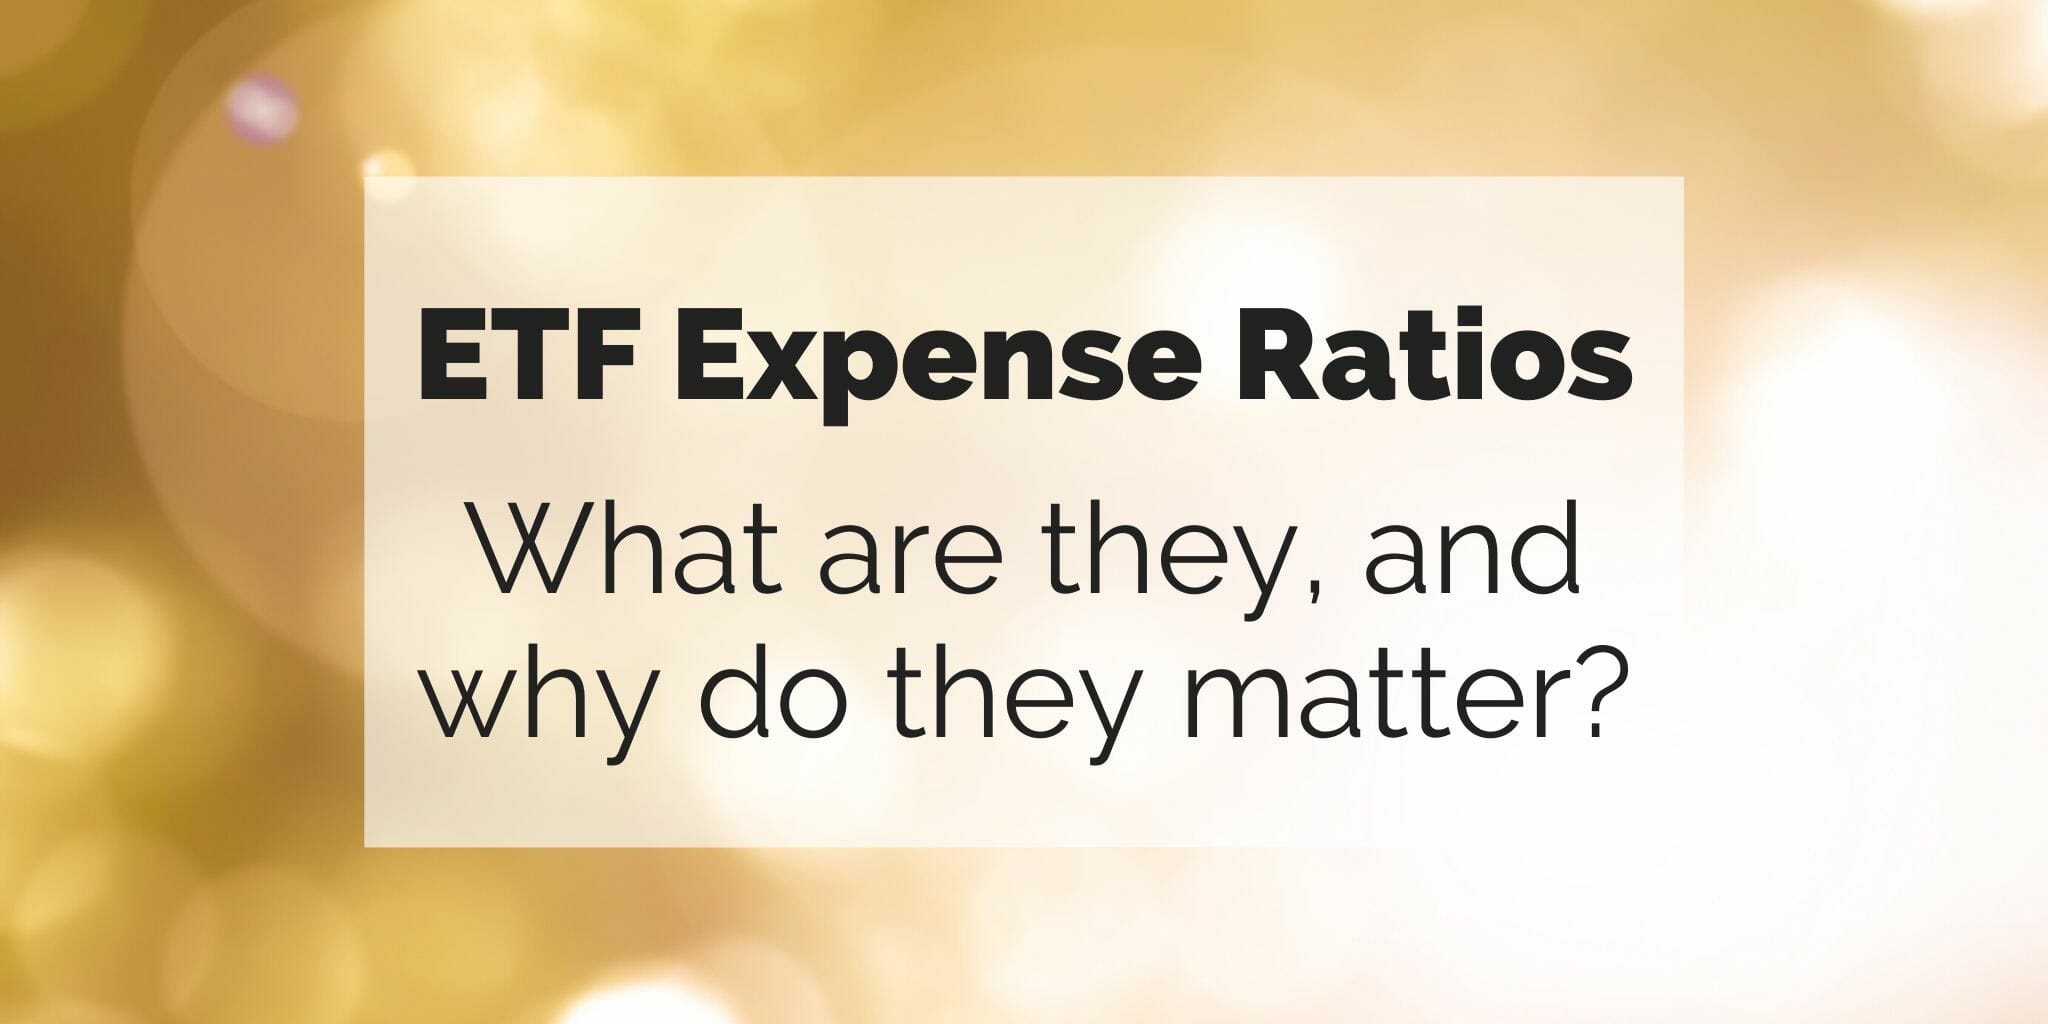 ETF Expense Ratios: What are they and why do they matter?